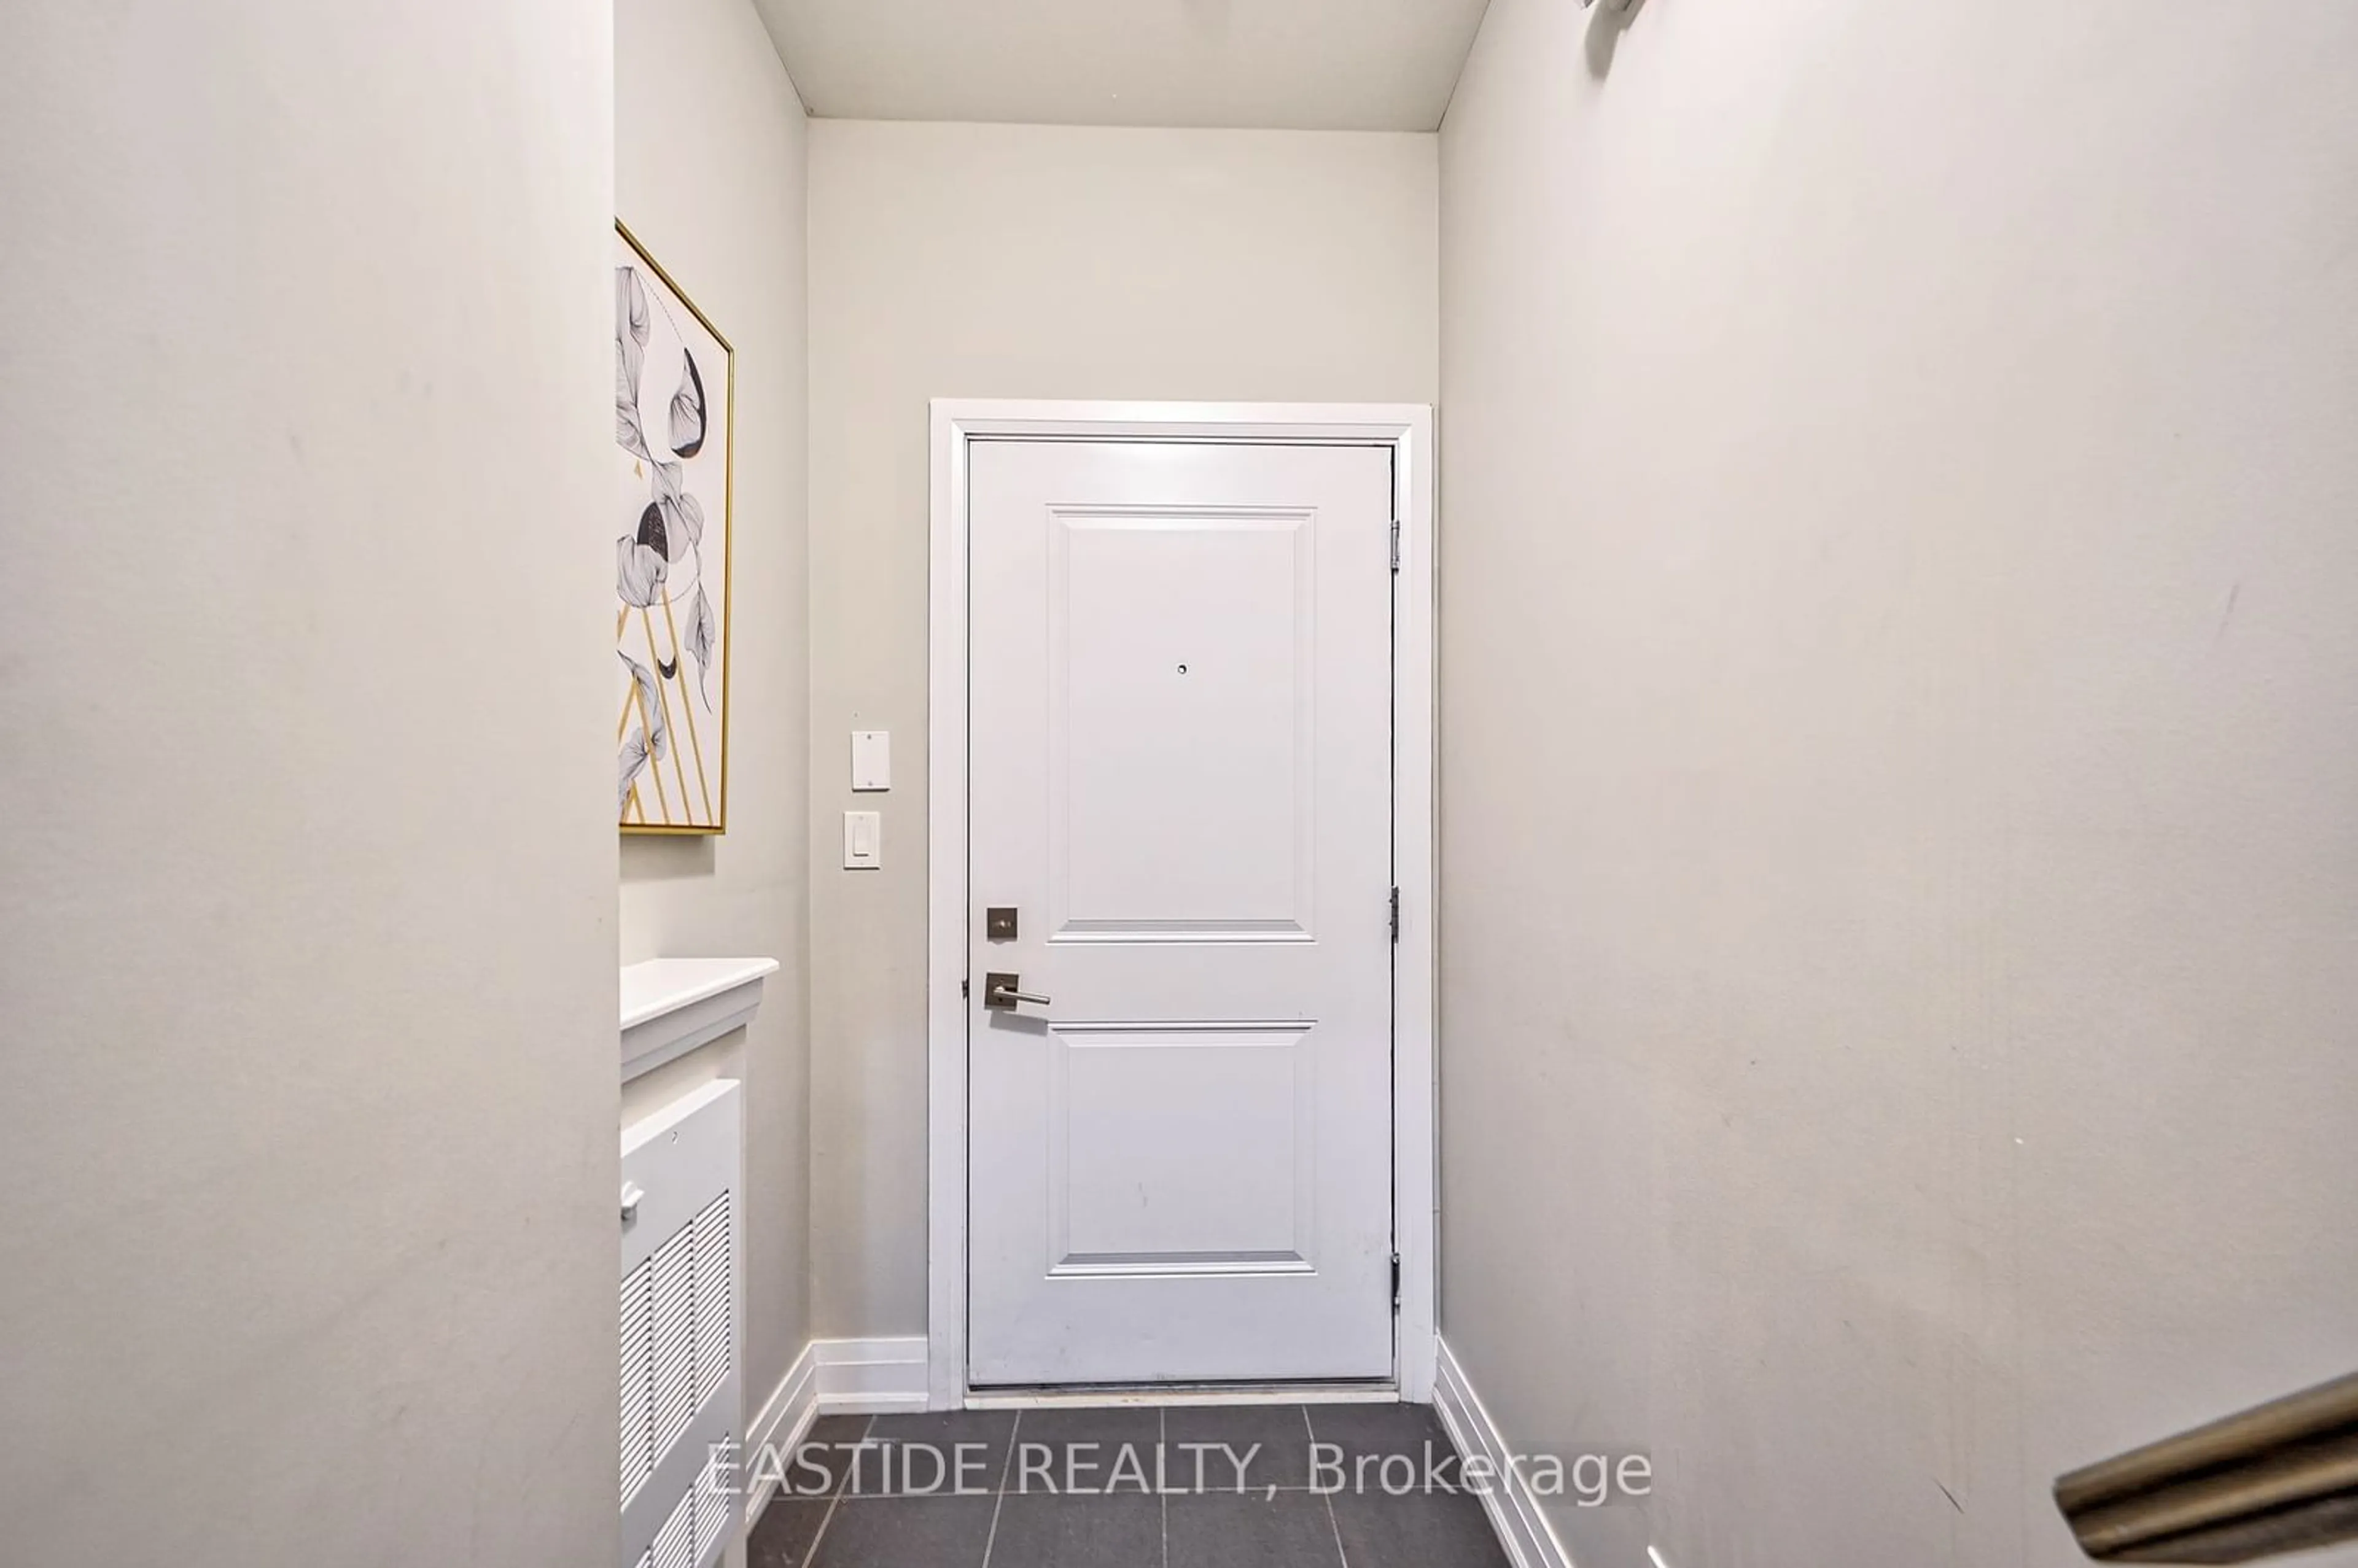 Indoor entryway for 85 Eastwood Park Gdns #23, Toronto Ontario M8W 0B2